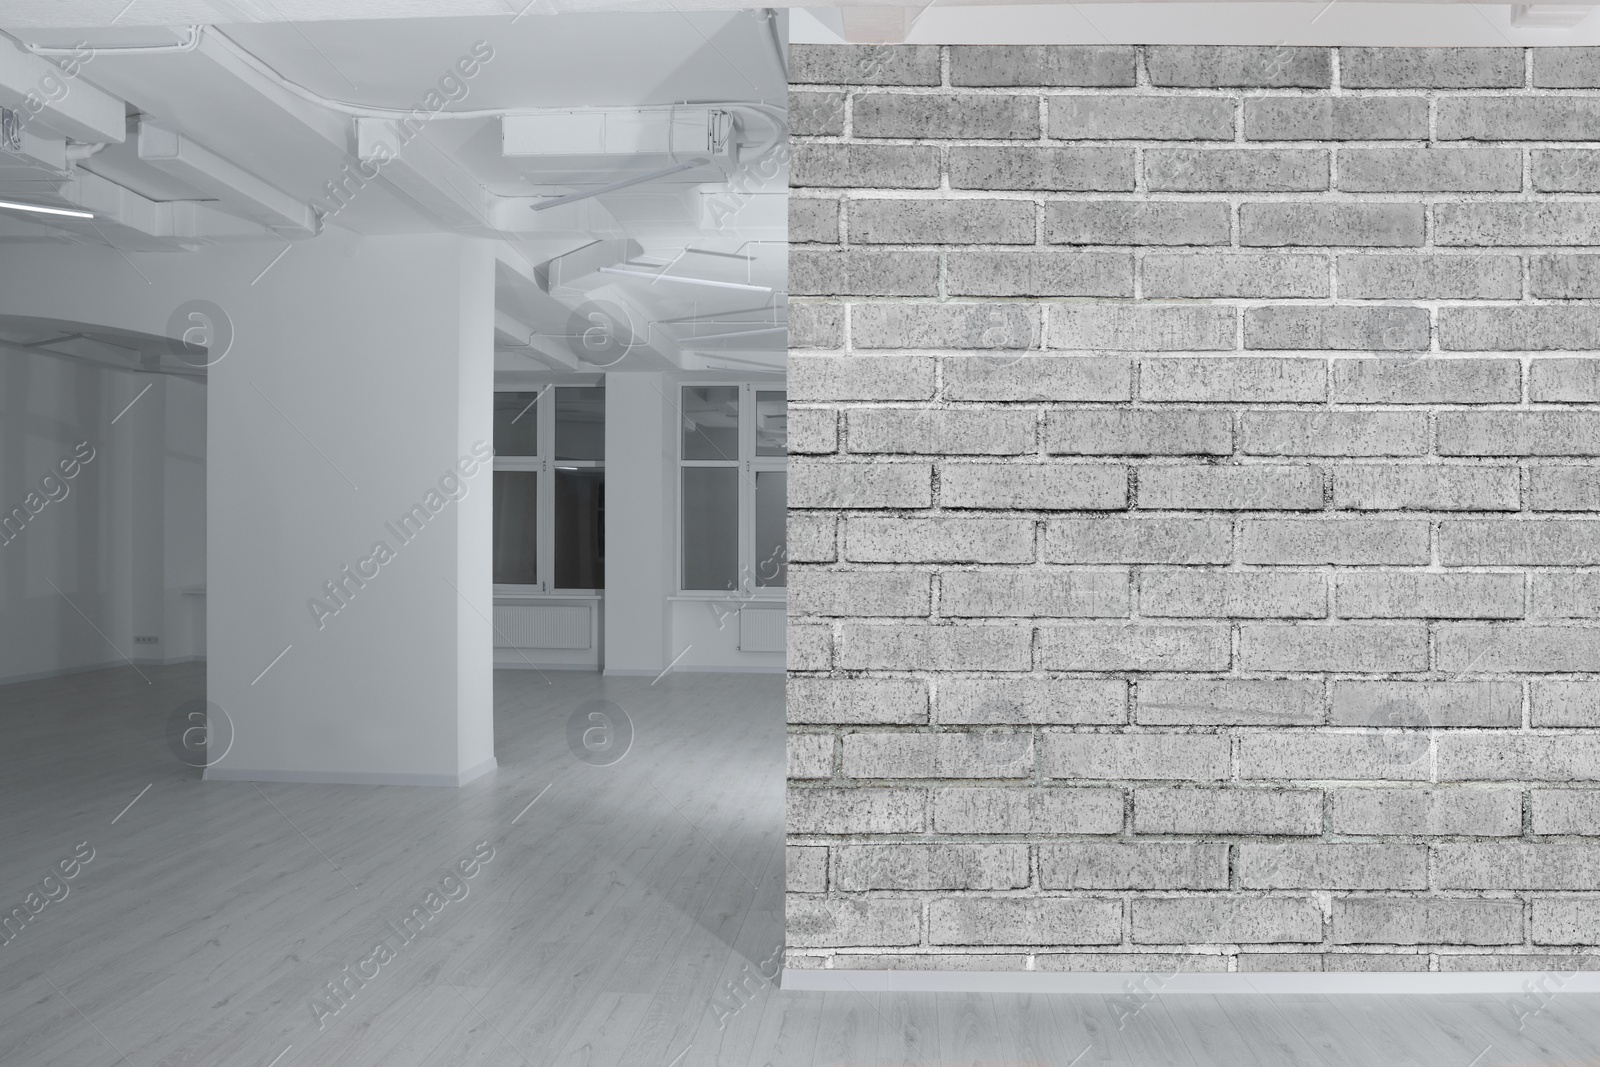 Image of Spacious room with brick wall and wooden floor